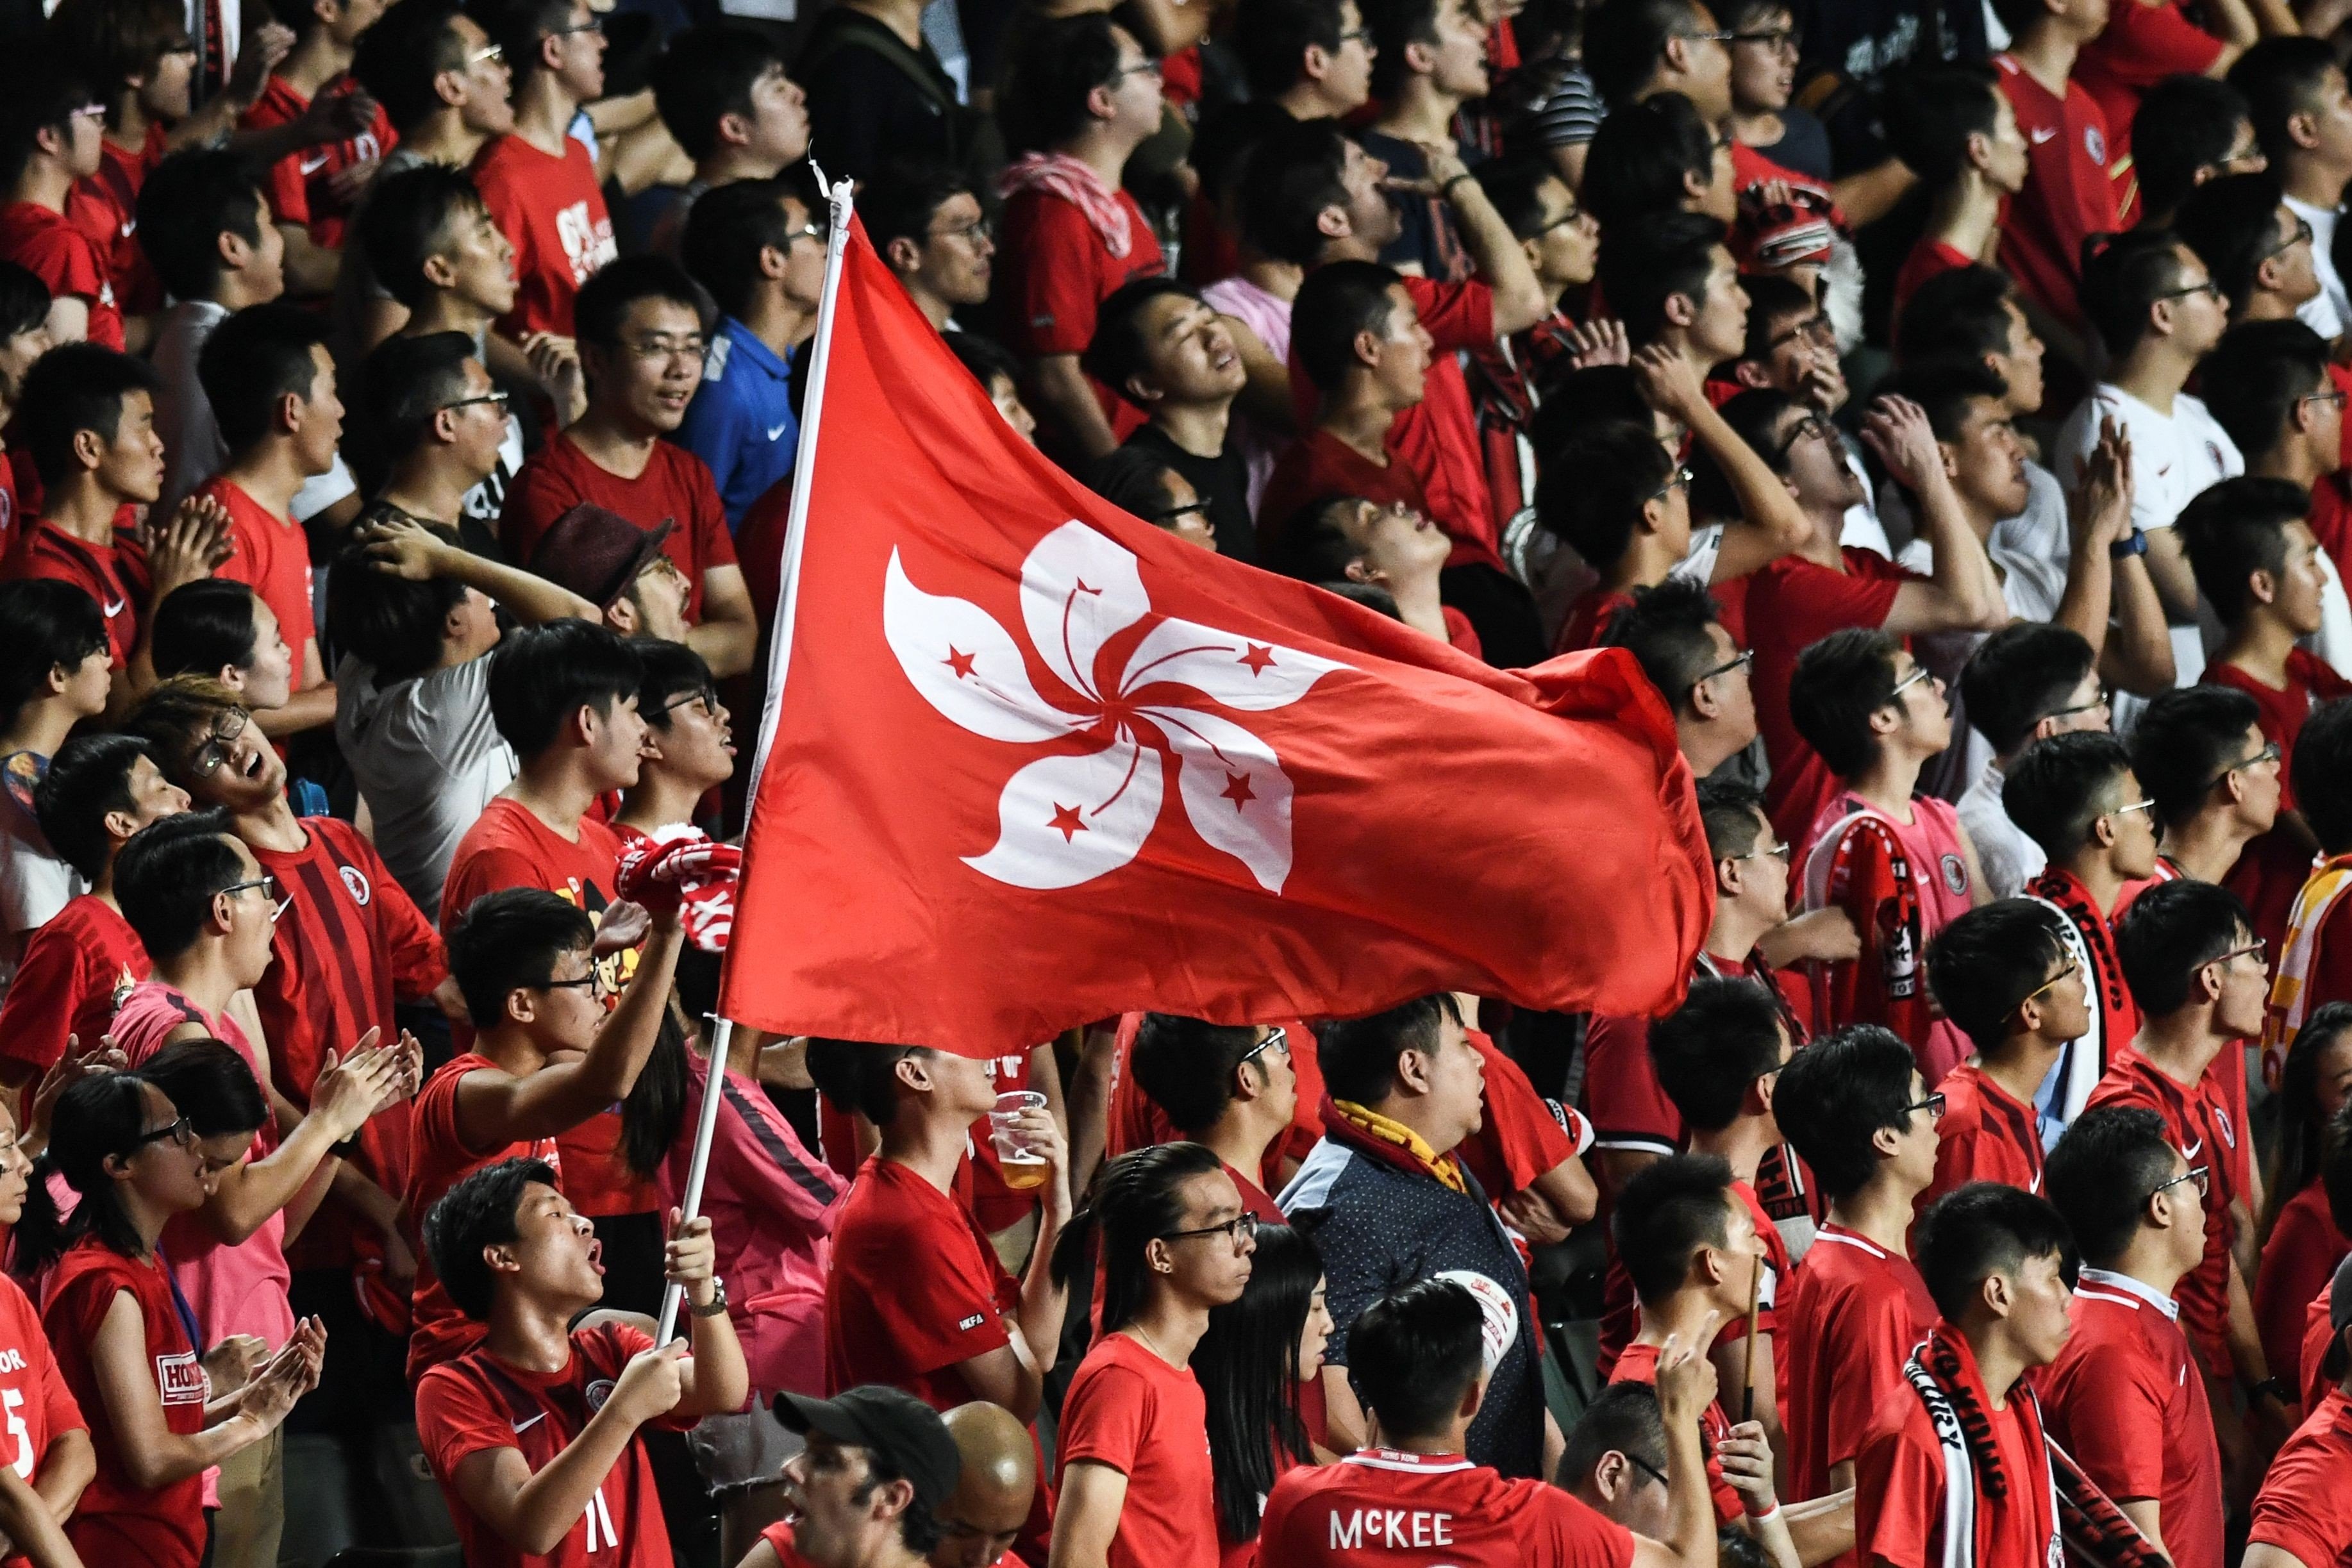 The HKFA is hopeful fans will refrain from booing at the match between Hong Kong and Lebanon on Tuesday. Photo: AFP